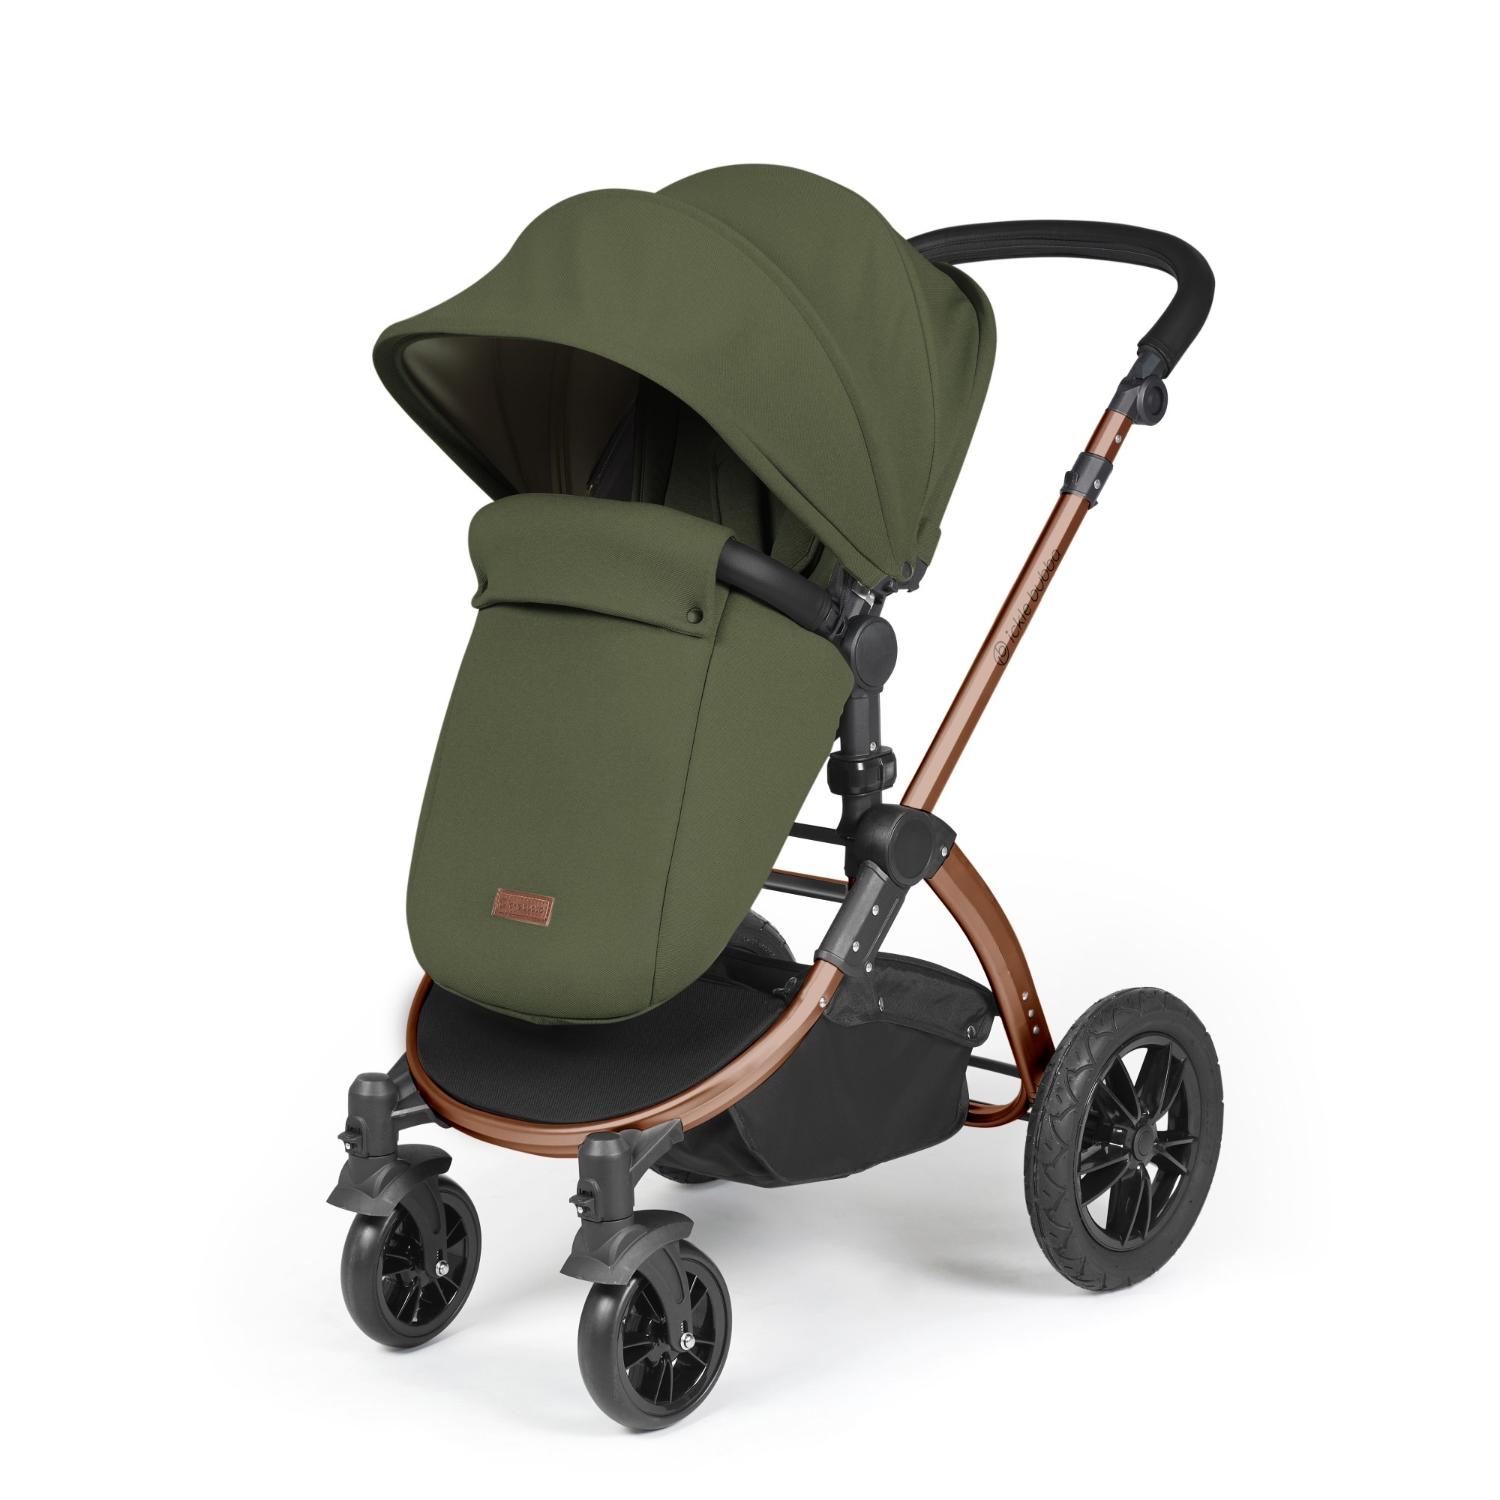 Ickle Bubba Stomp Luxe Pushchair with foot warmer attached in Woodland green colour with bronze chassis